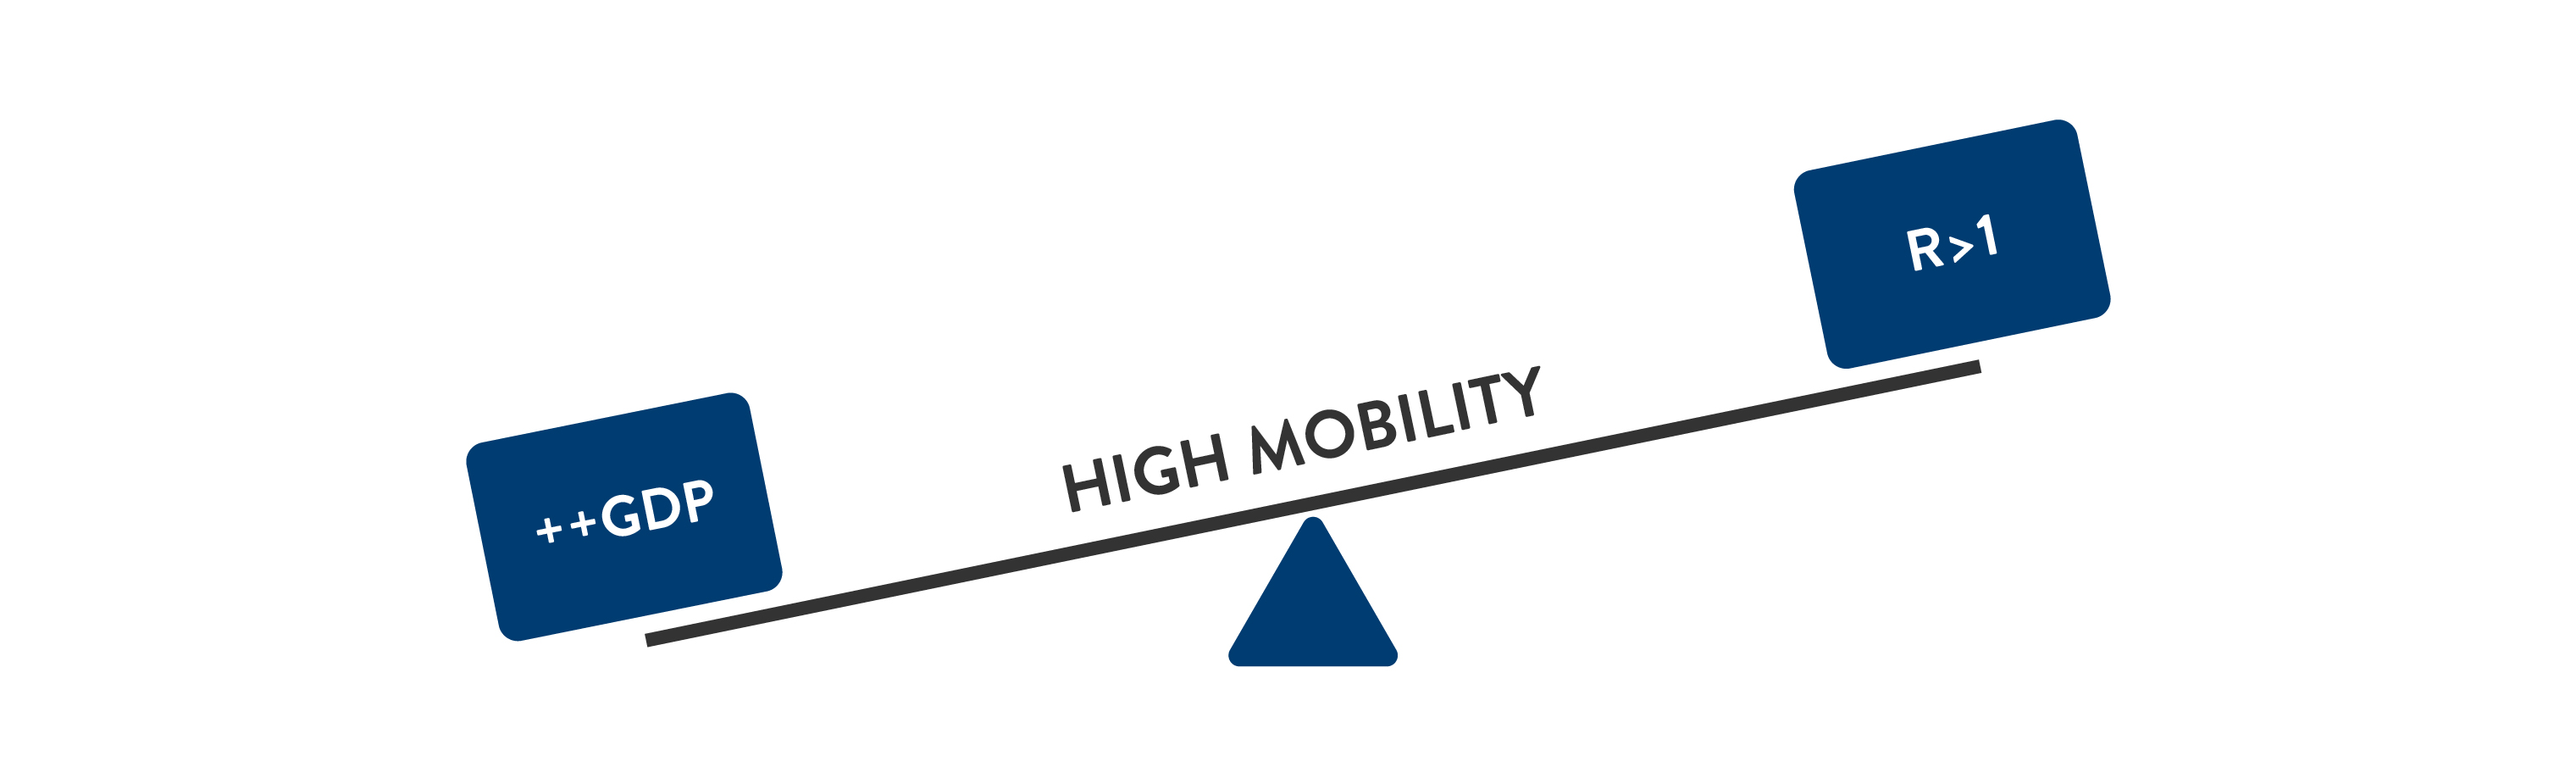 smart-exit-covid-19-early-warning-model - Figure 1 – Early March: High mobility = high GDP = high R